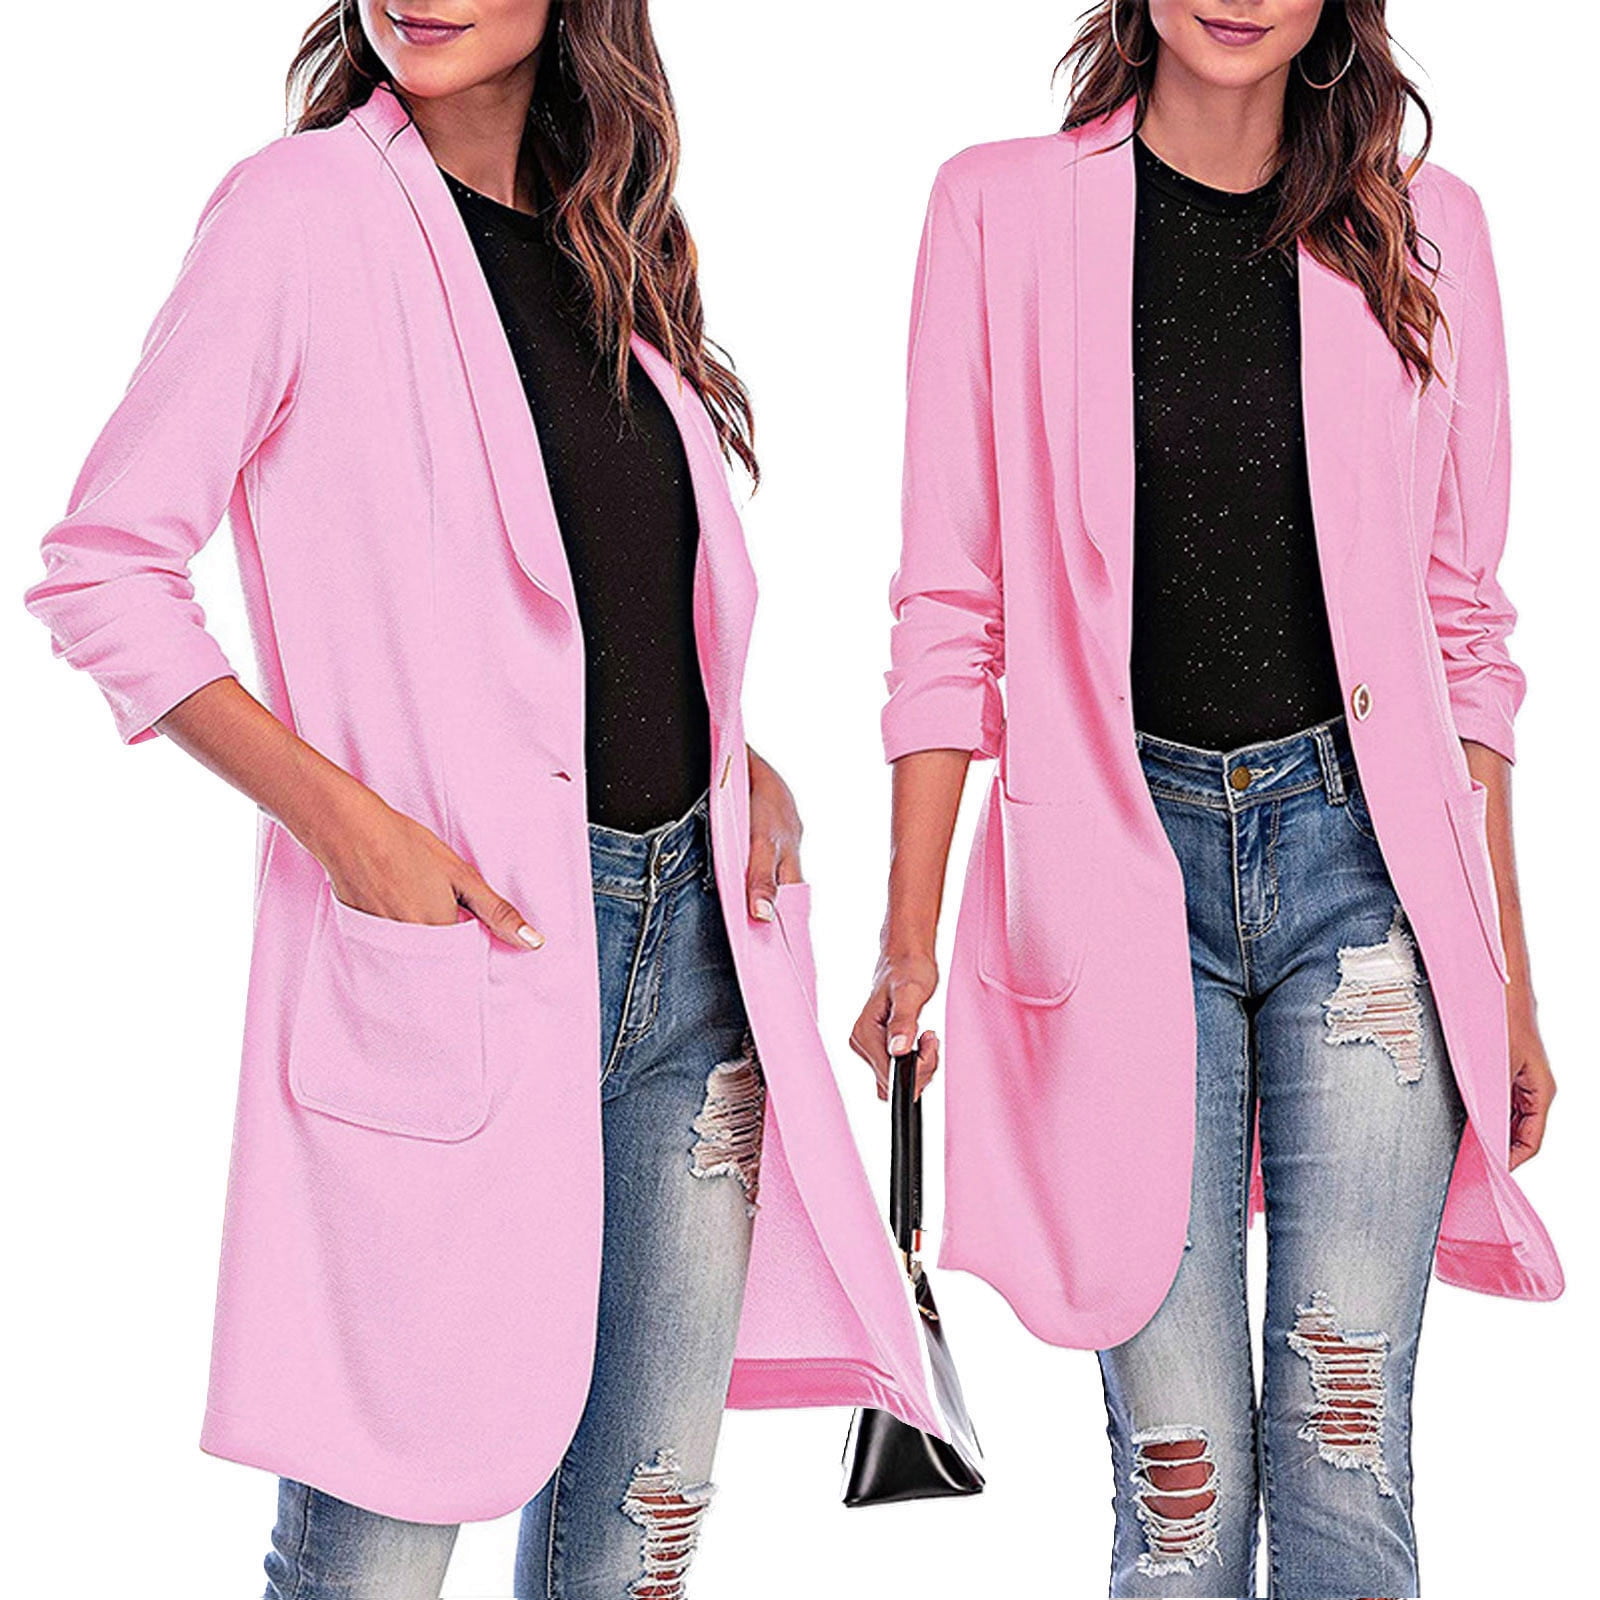 Meaneor Womens Casual Blazer Open Front Long Sleeve Cotton Cardigan Slim Short Jacket